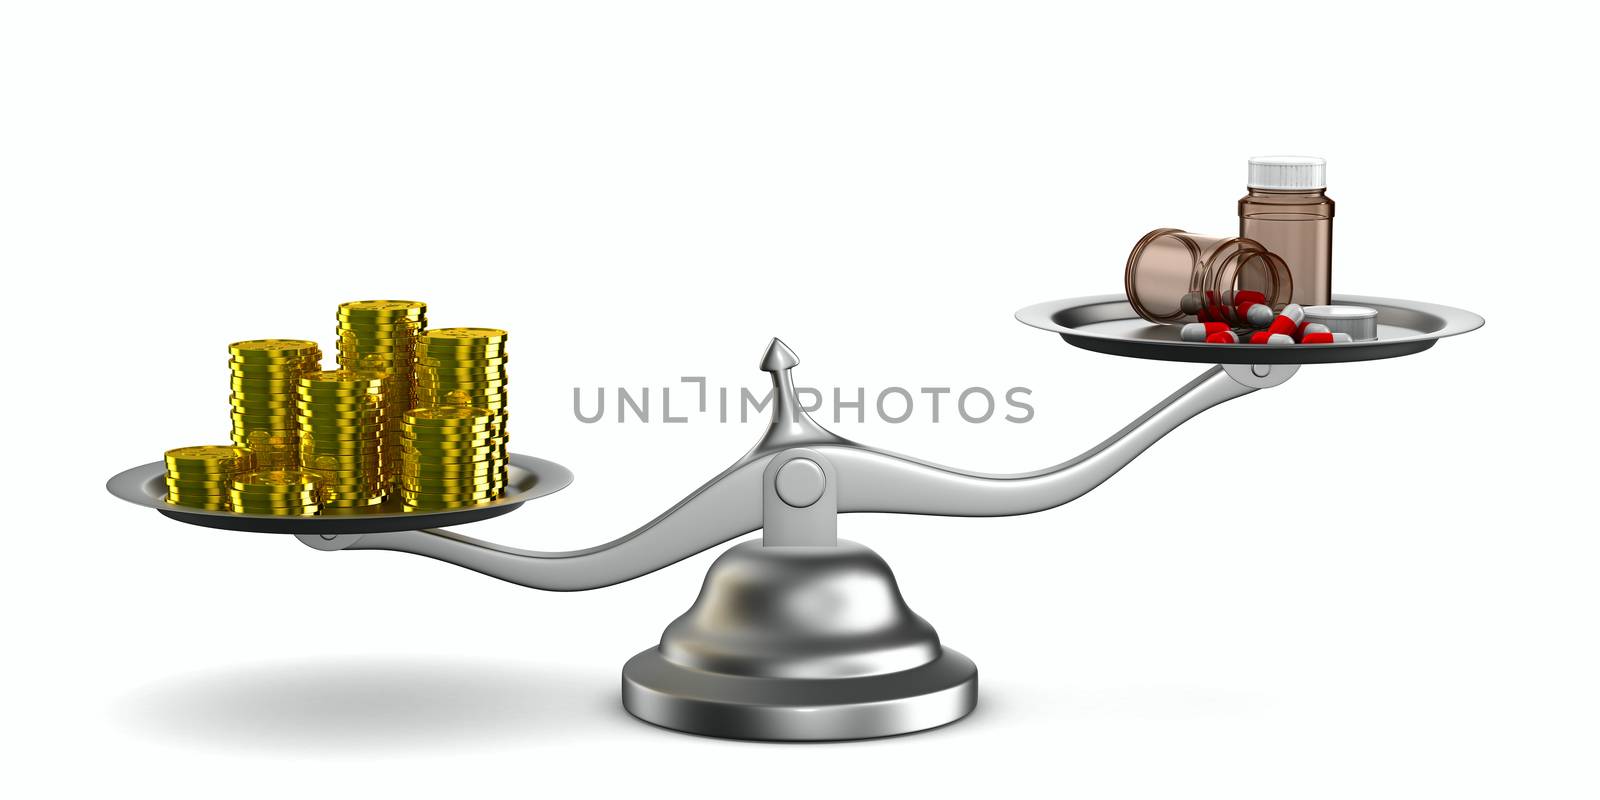 Medicines and money on scales. Isolated 3D image